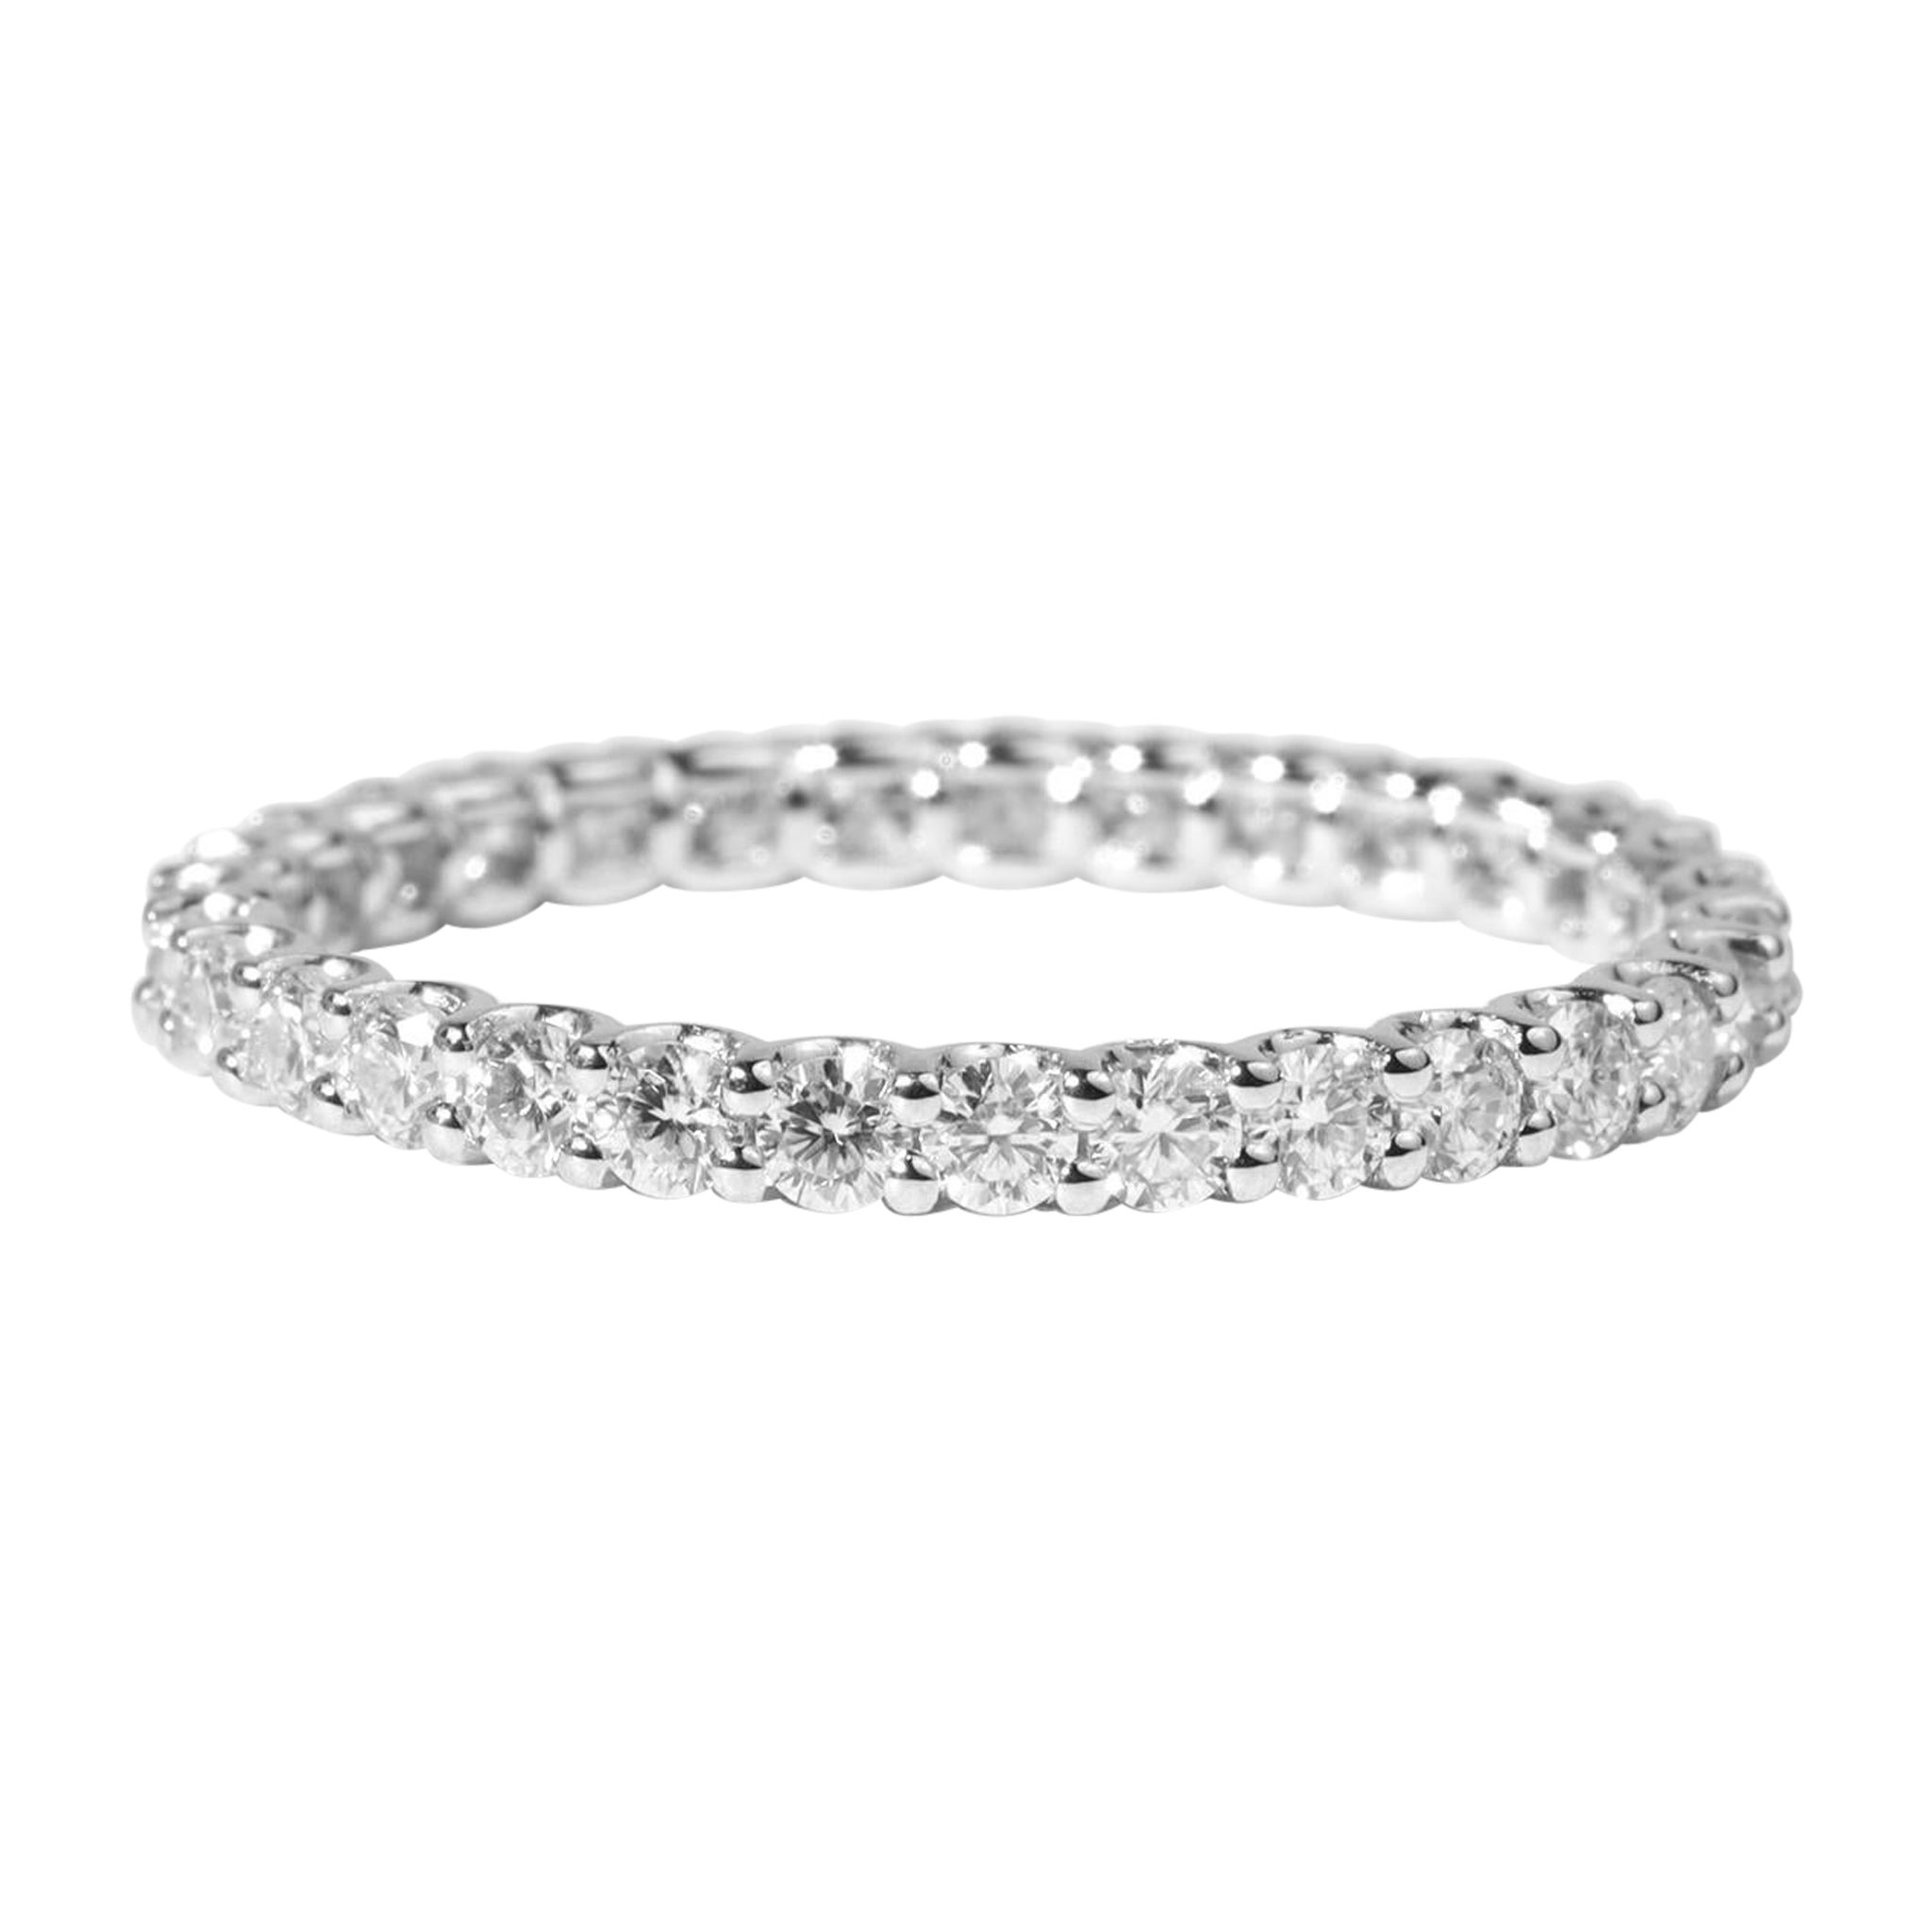 1.08 Carat Round Cut Diamond Wedding Band in 18k White Gold For Sale